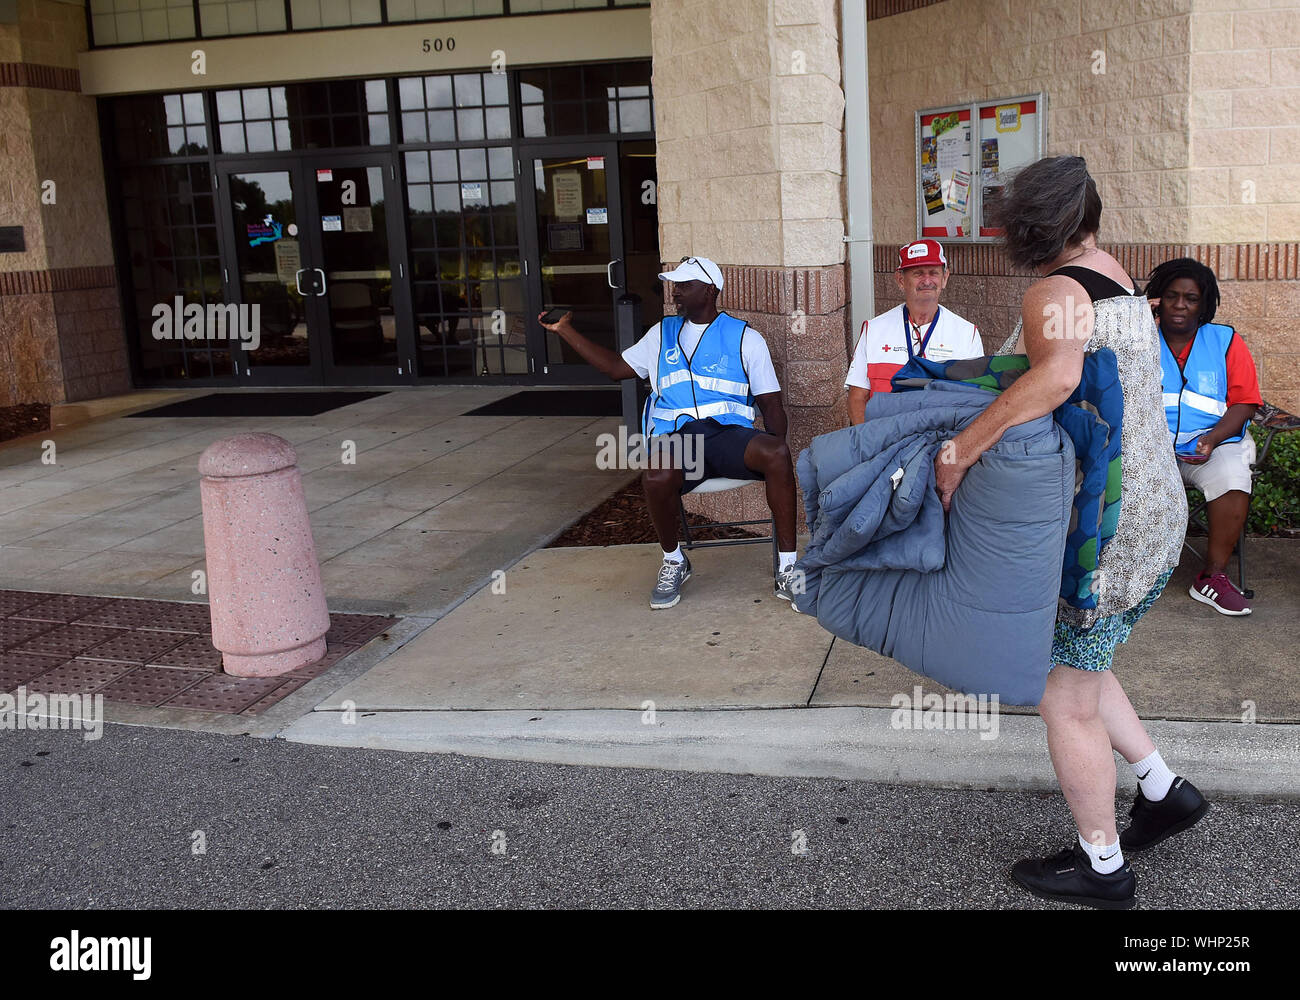 September 2, 2019 - Cocoa, Florida, United States - A woman carrying blankets arrives at an evacuation shelter as Hurricane Dorian is forecast to move dangerously close to the coast to Florida after striking the Bahamas as a Category 5 storm, on September 2, 2019 in Cocoa, Florida. Credit: Paul Hennessy/Alamy Live News Stock Photo